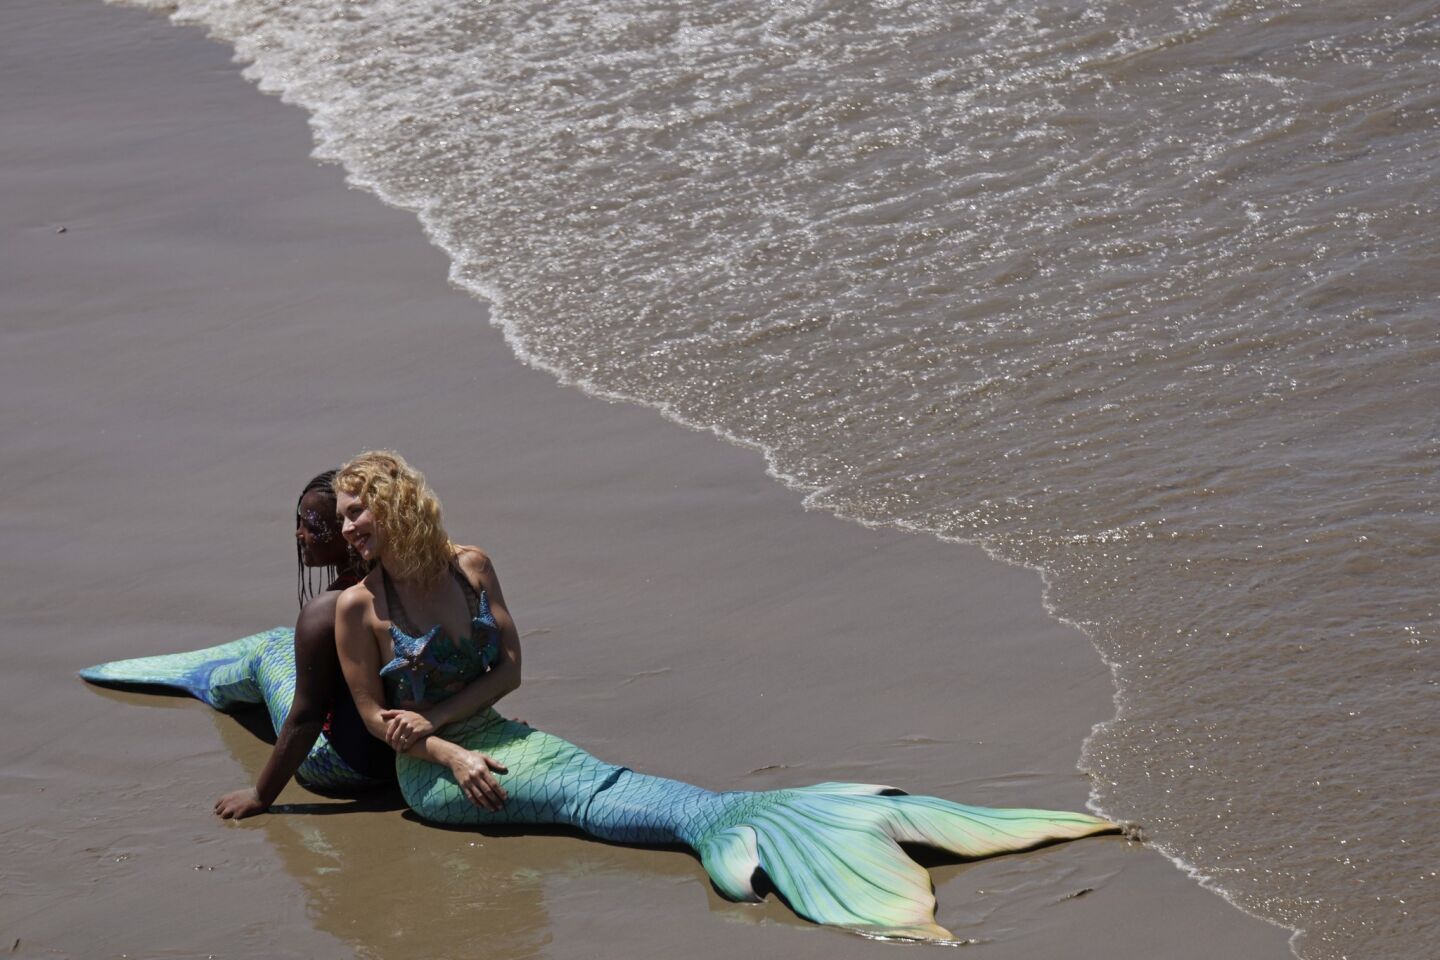 Promise Edmondson, 10, left, of Indianapolis and actress Megan Mills are just a pair of mermaids who don't seem to mind the heat in Santa Monica. Promise was fulfilling a birthday wish to be a mermaid for a day.